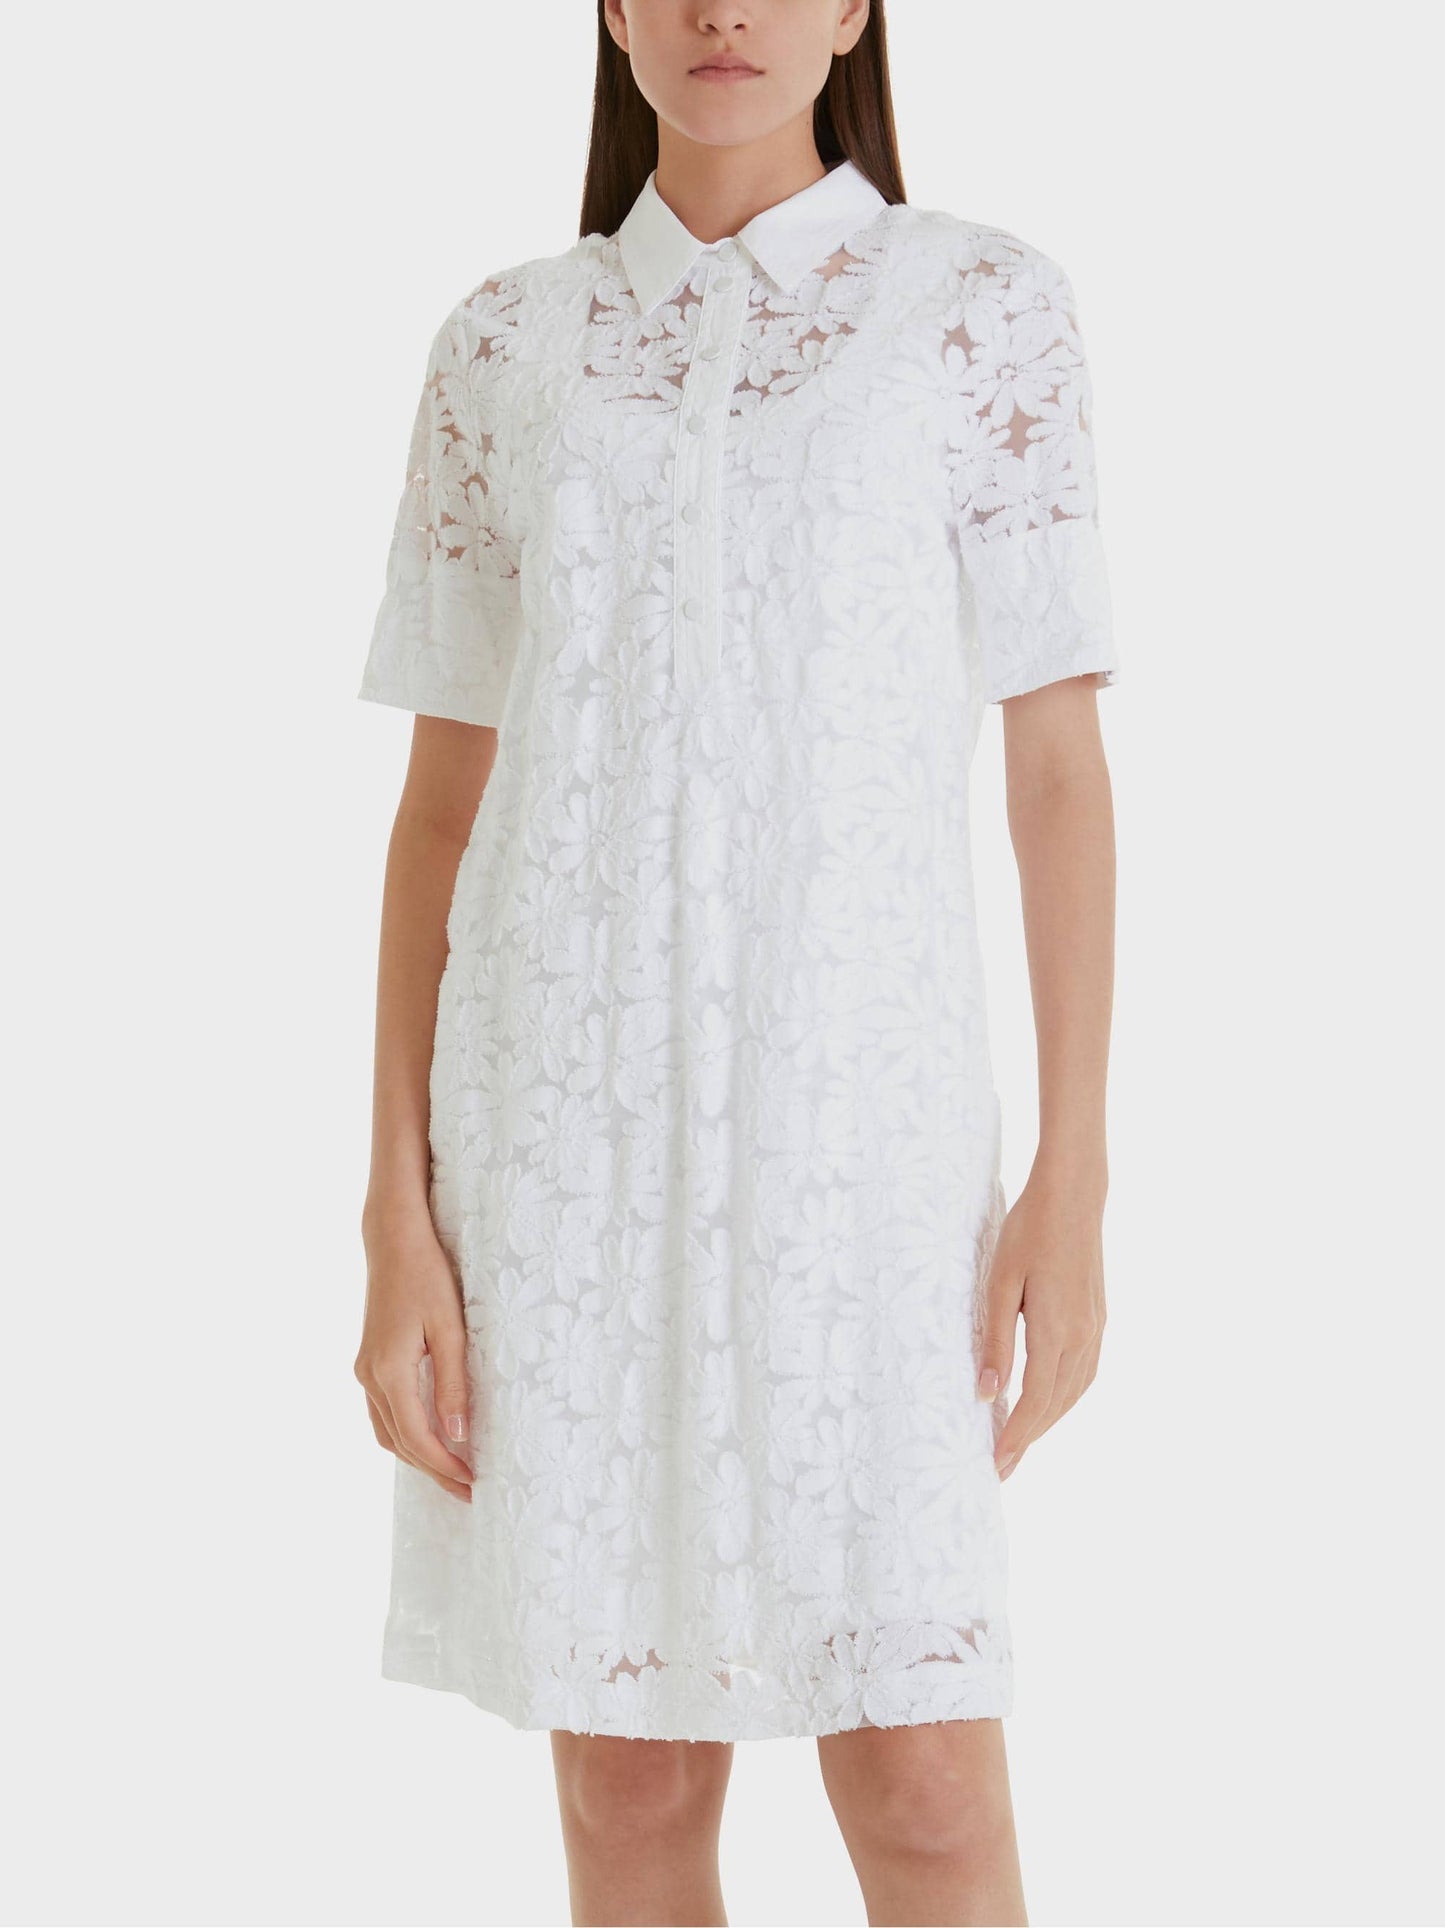 Marc Cain Dress in Floral Lace